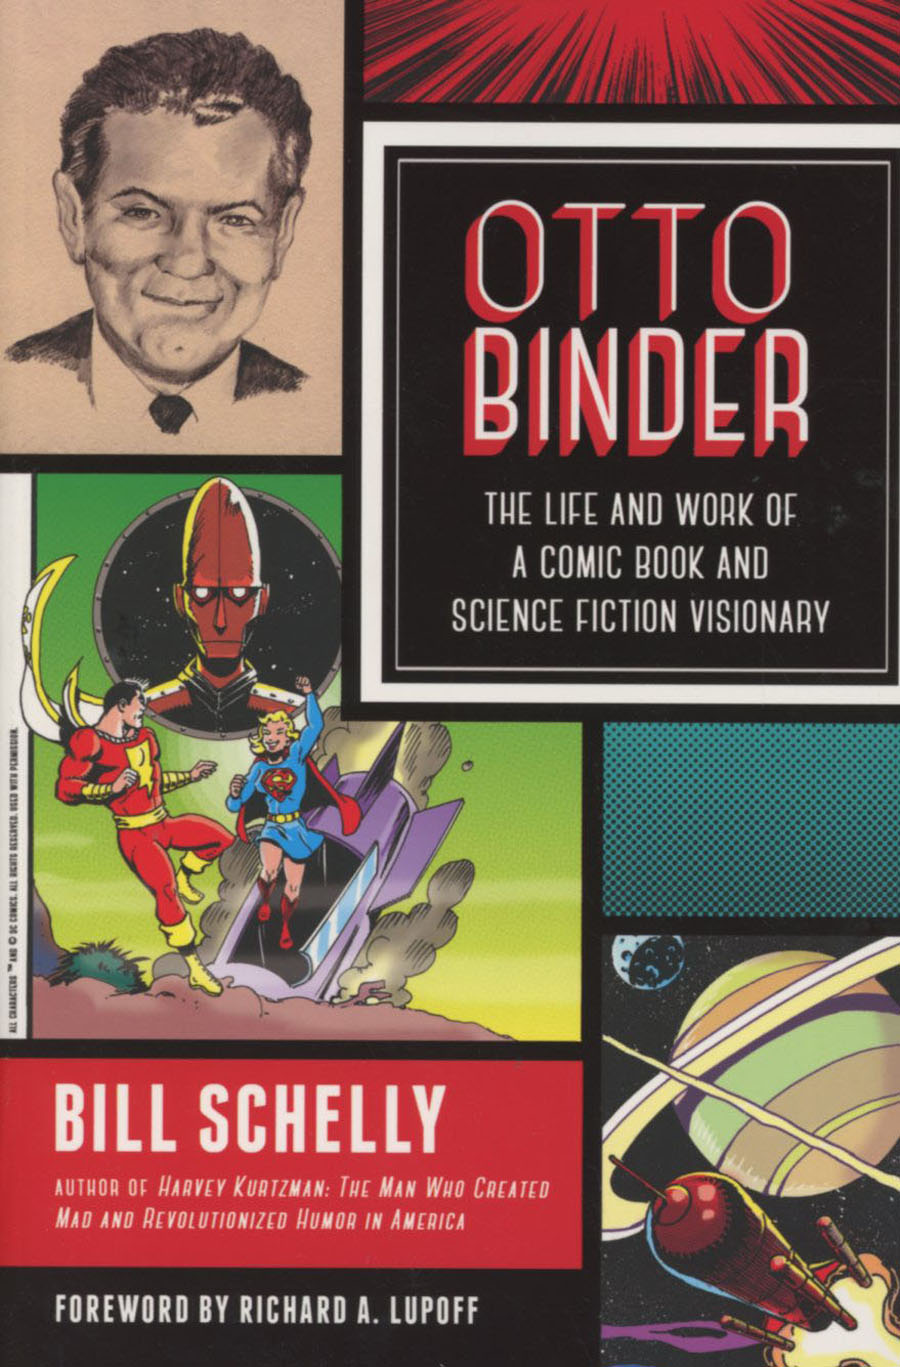 Otto Binder Life And Work Of A Comic Book And Science Fiction Visionary SC